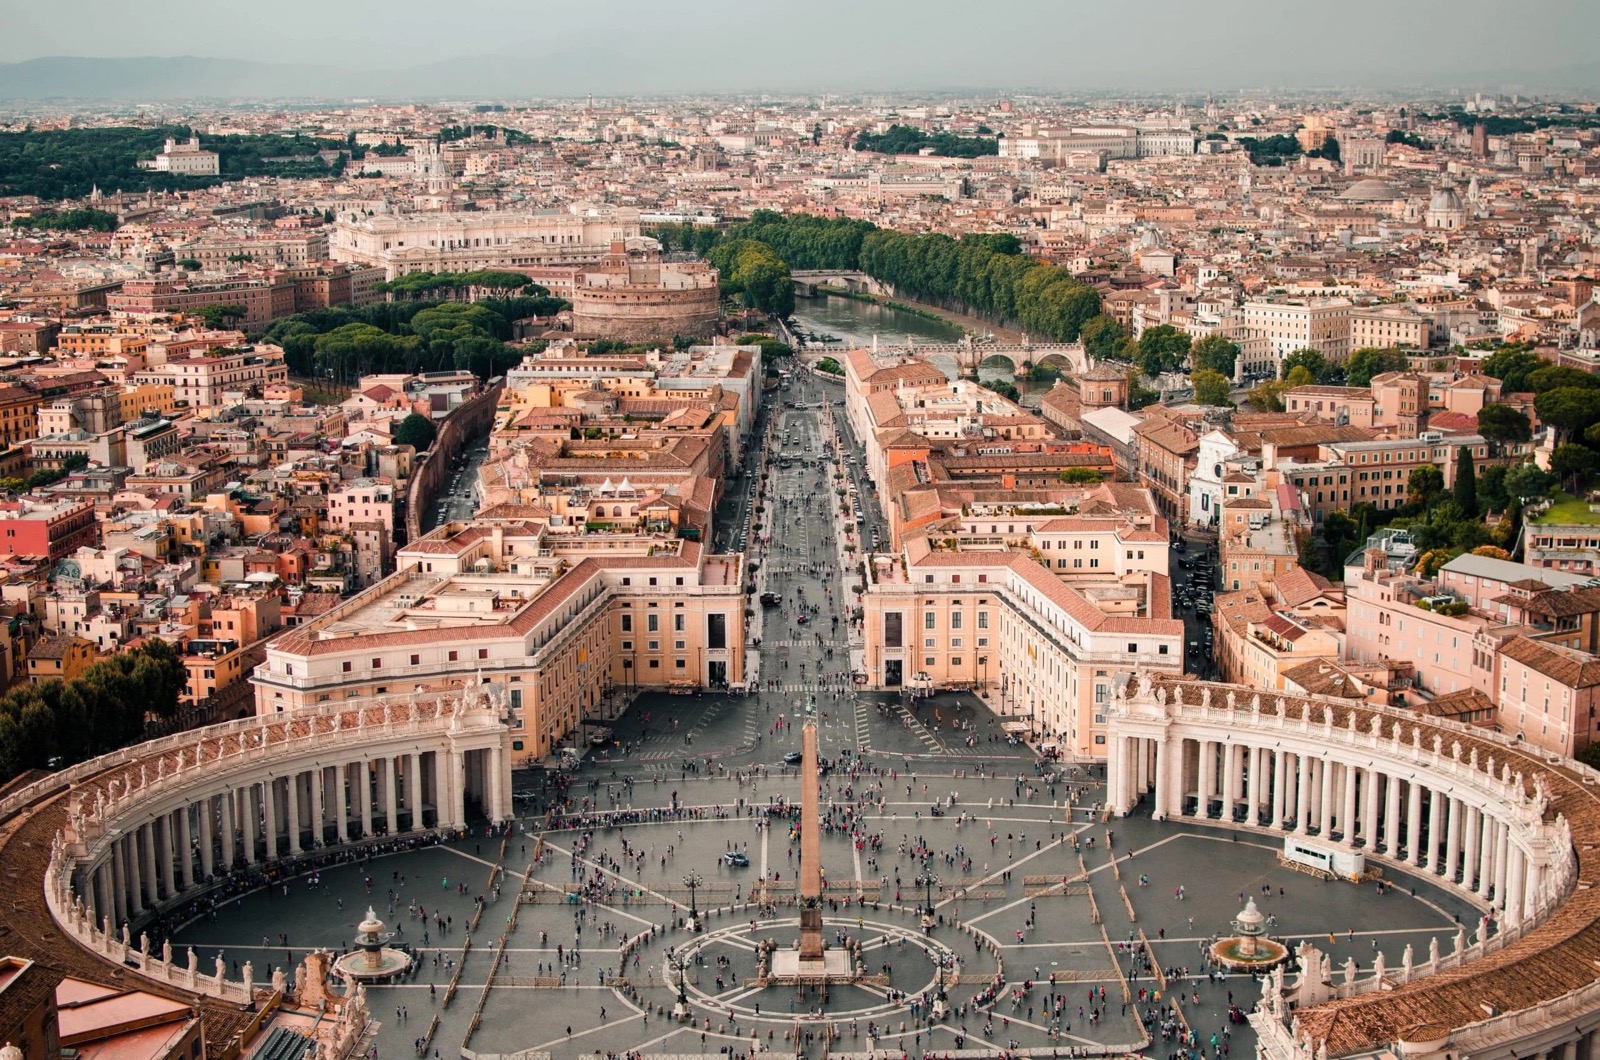 Are You a World Traveler? Test Your Knowledge by Matching These Majestic Natural Sites to Their Countries! Vatican City